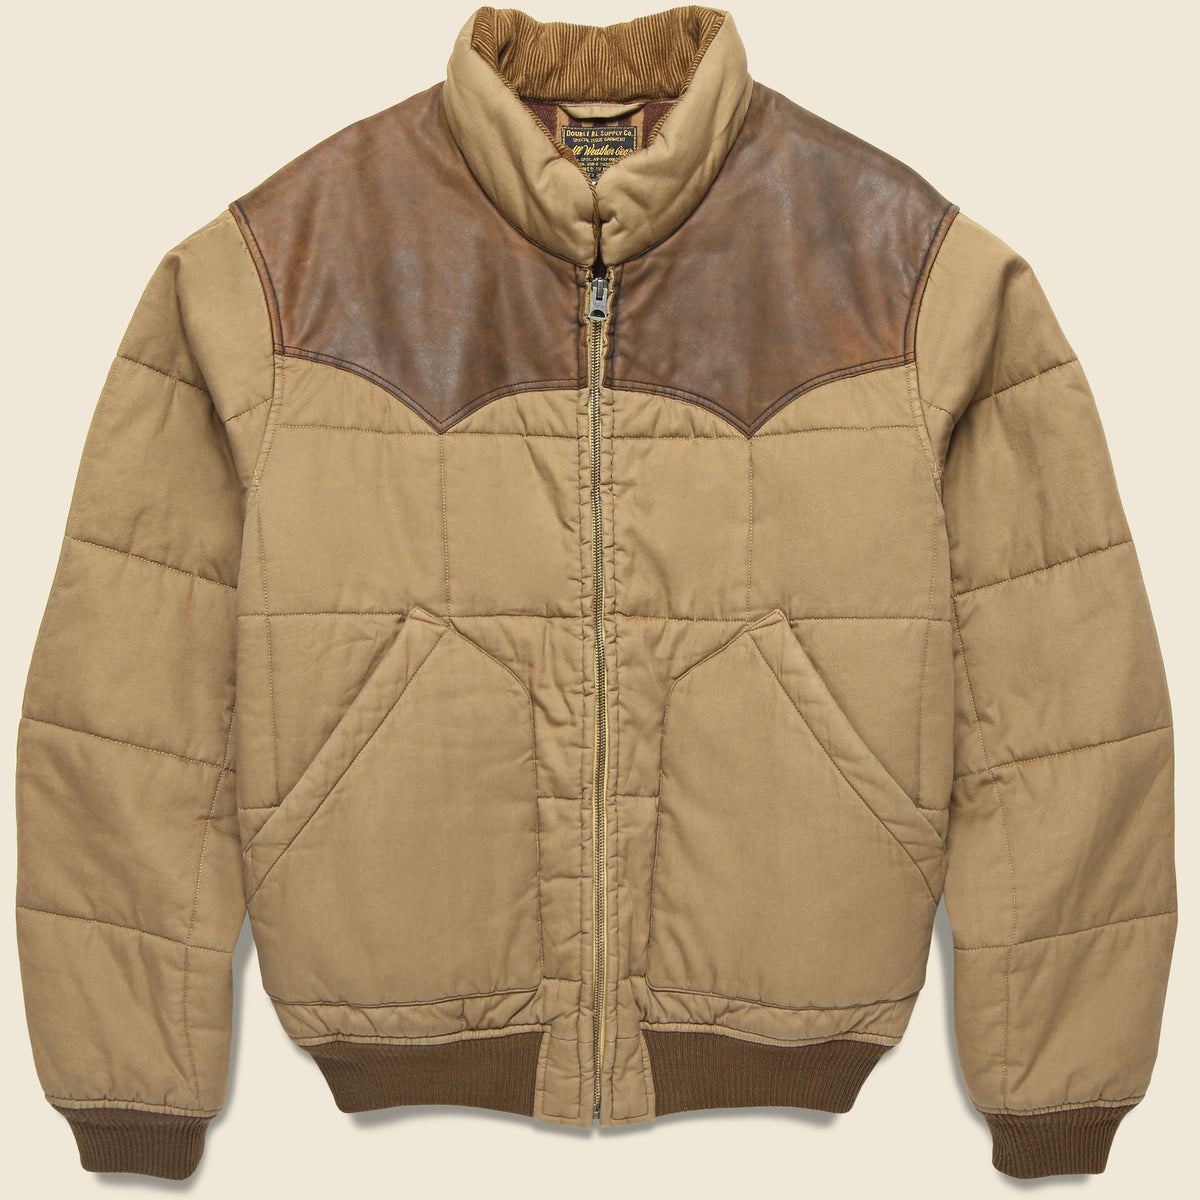 Breckenridge Quilted Oil Cloth Bomber Jacket - Tan